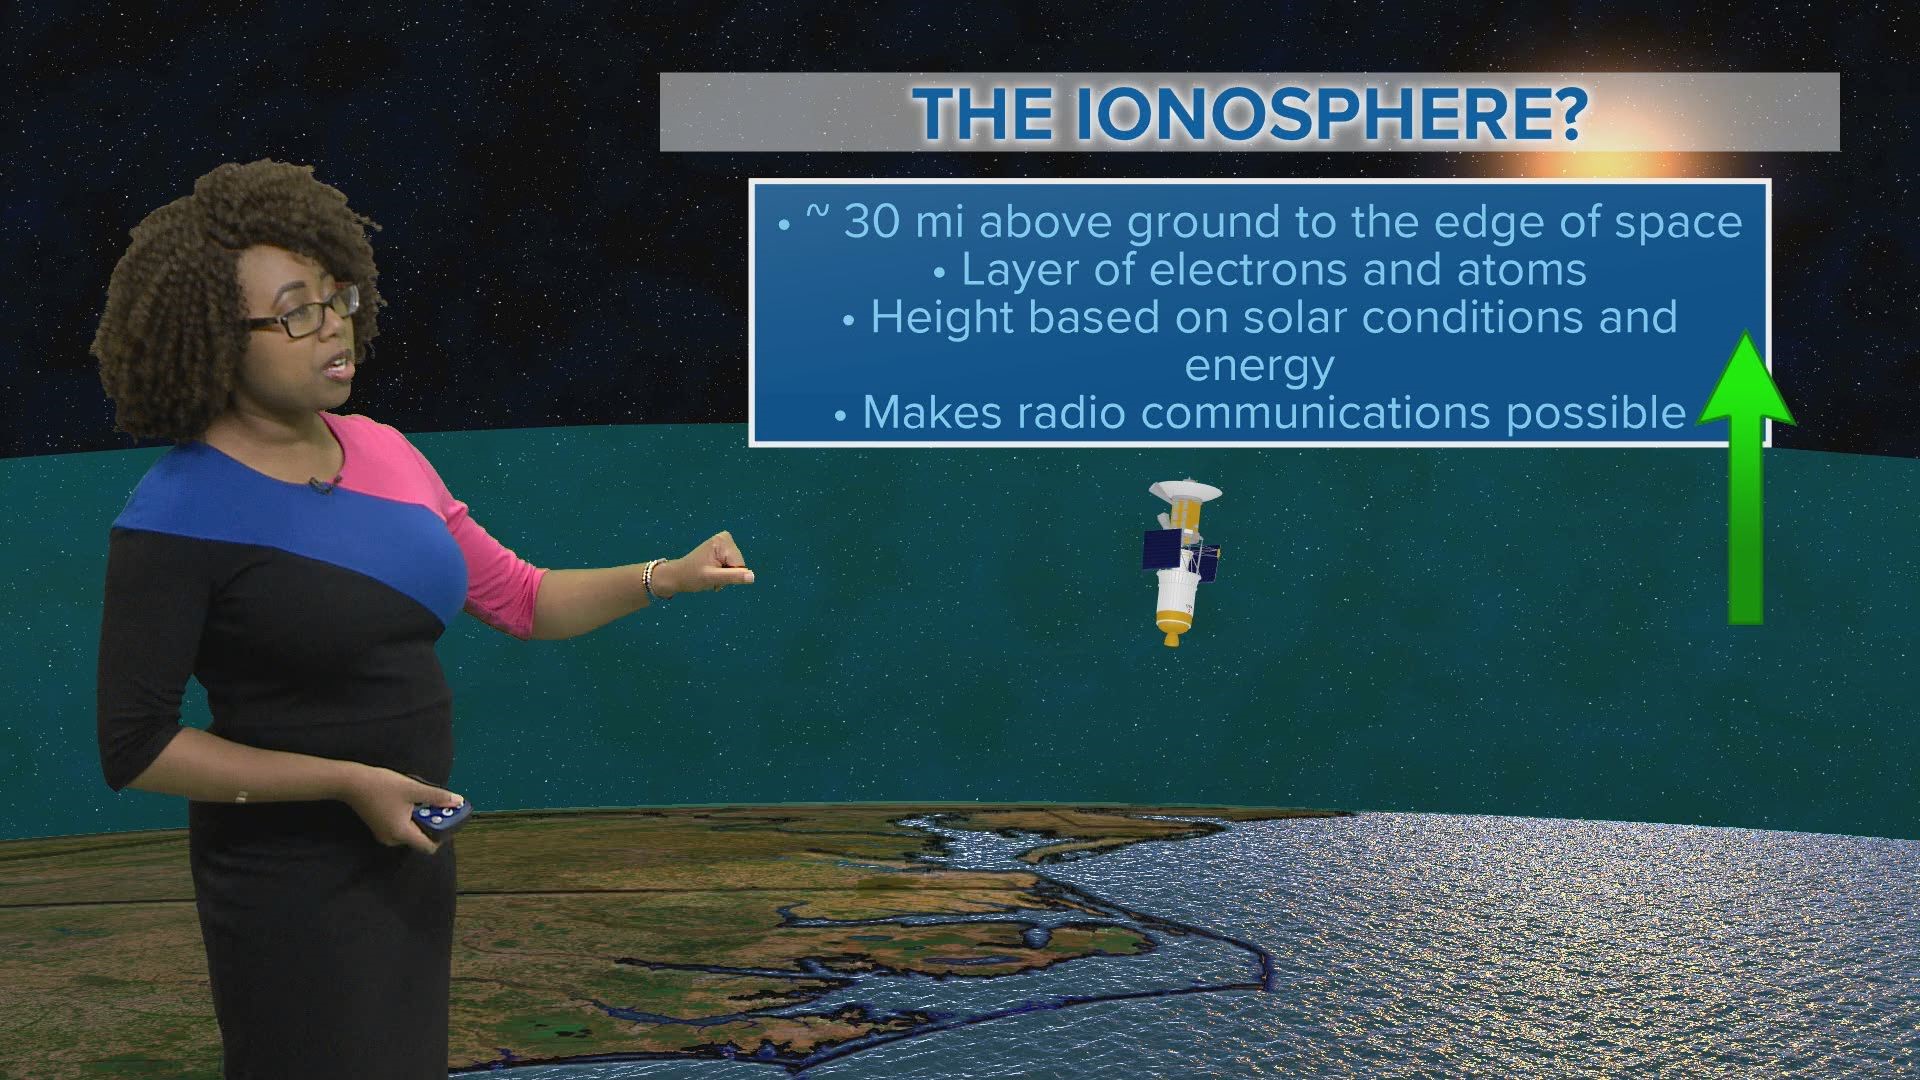 13News Now meteorologist Rachael Peart explains the changing of the seasons and what a set of mini satellites that will study the ionosphere will mean for forecasting weather and hurricanes.